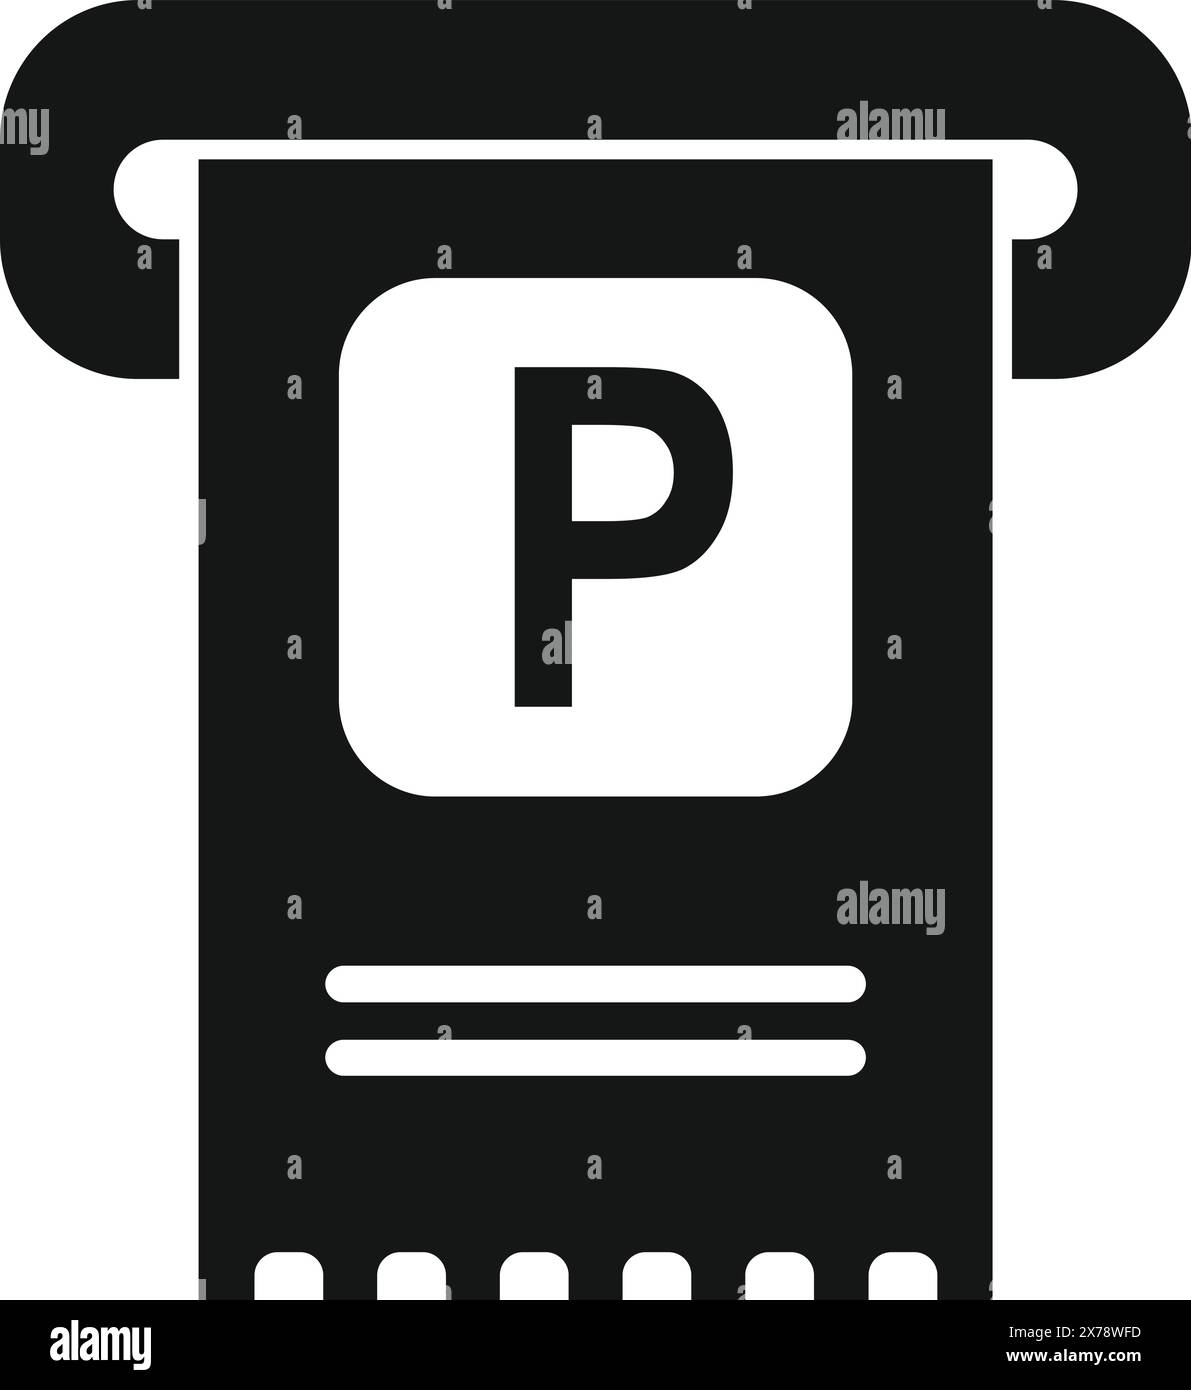 Vector illustration of a simple flat black and white parking meter icon symbolizing urban transportation and city street payment regulation Stock Vector